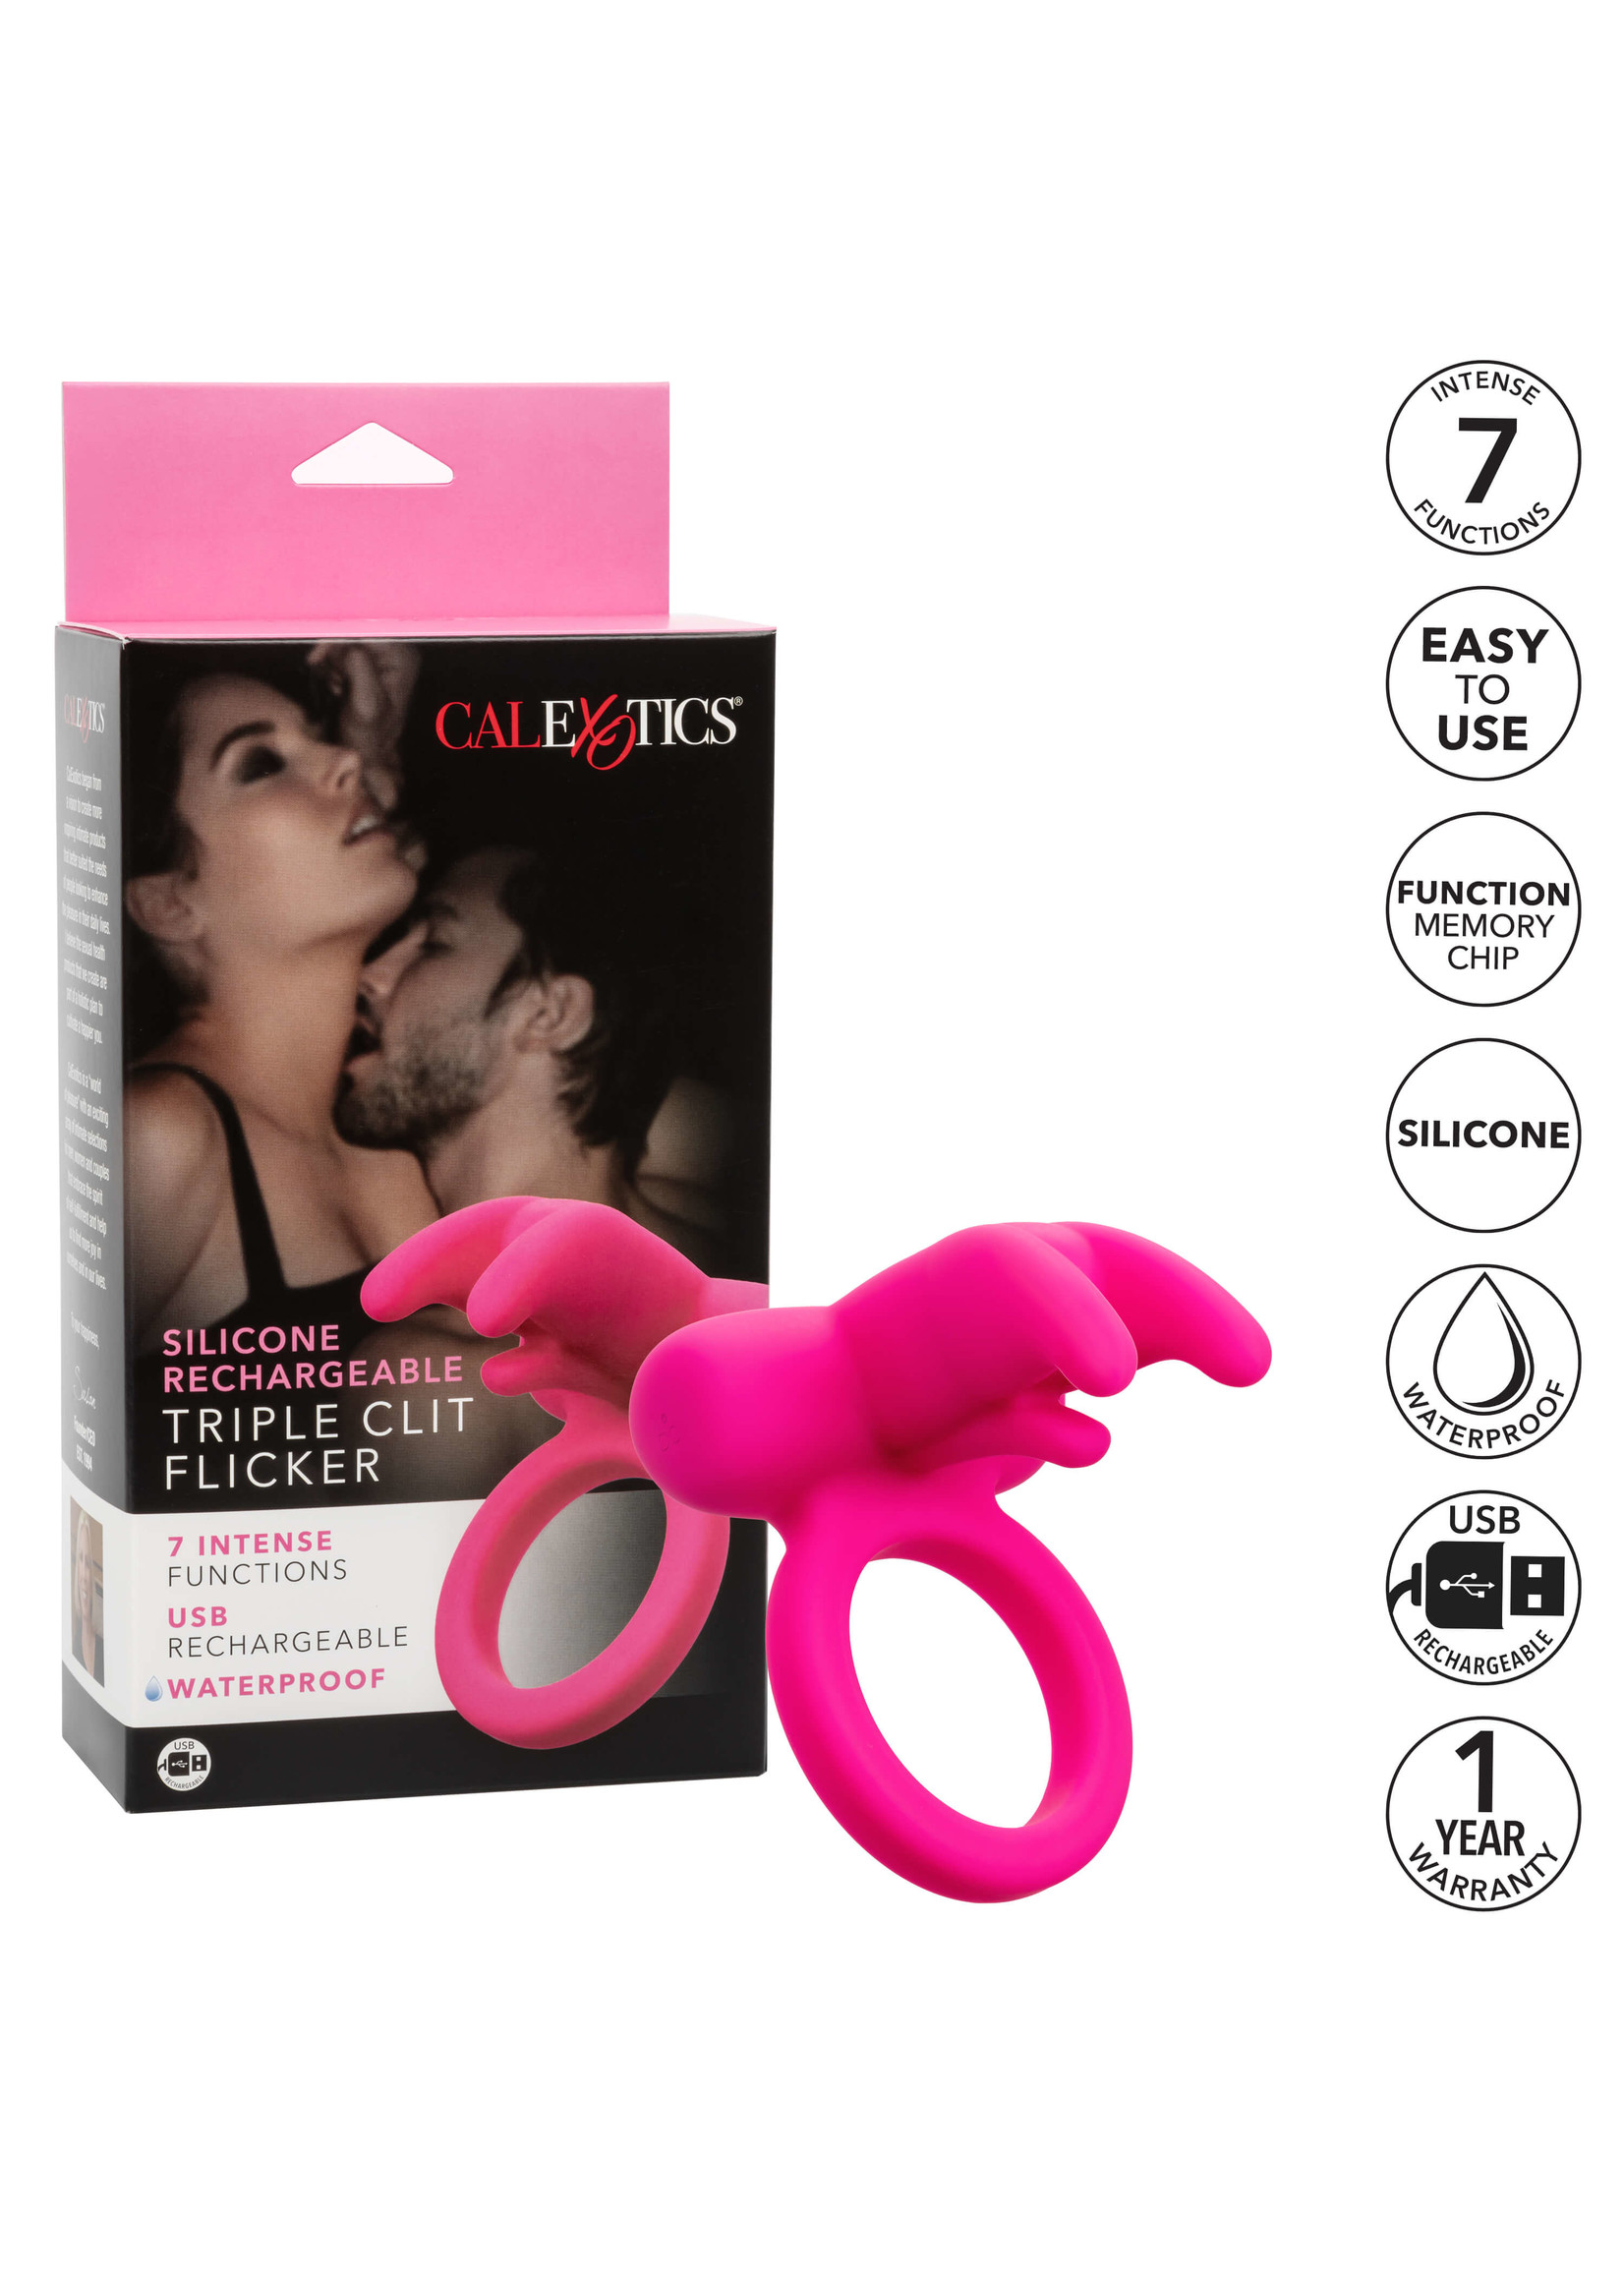 Cal Exotic Novelties Silicone Rechargeable Triple Clit Flicker